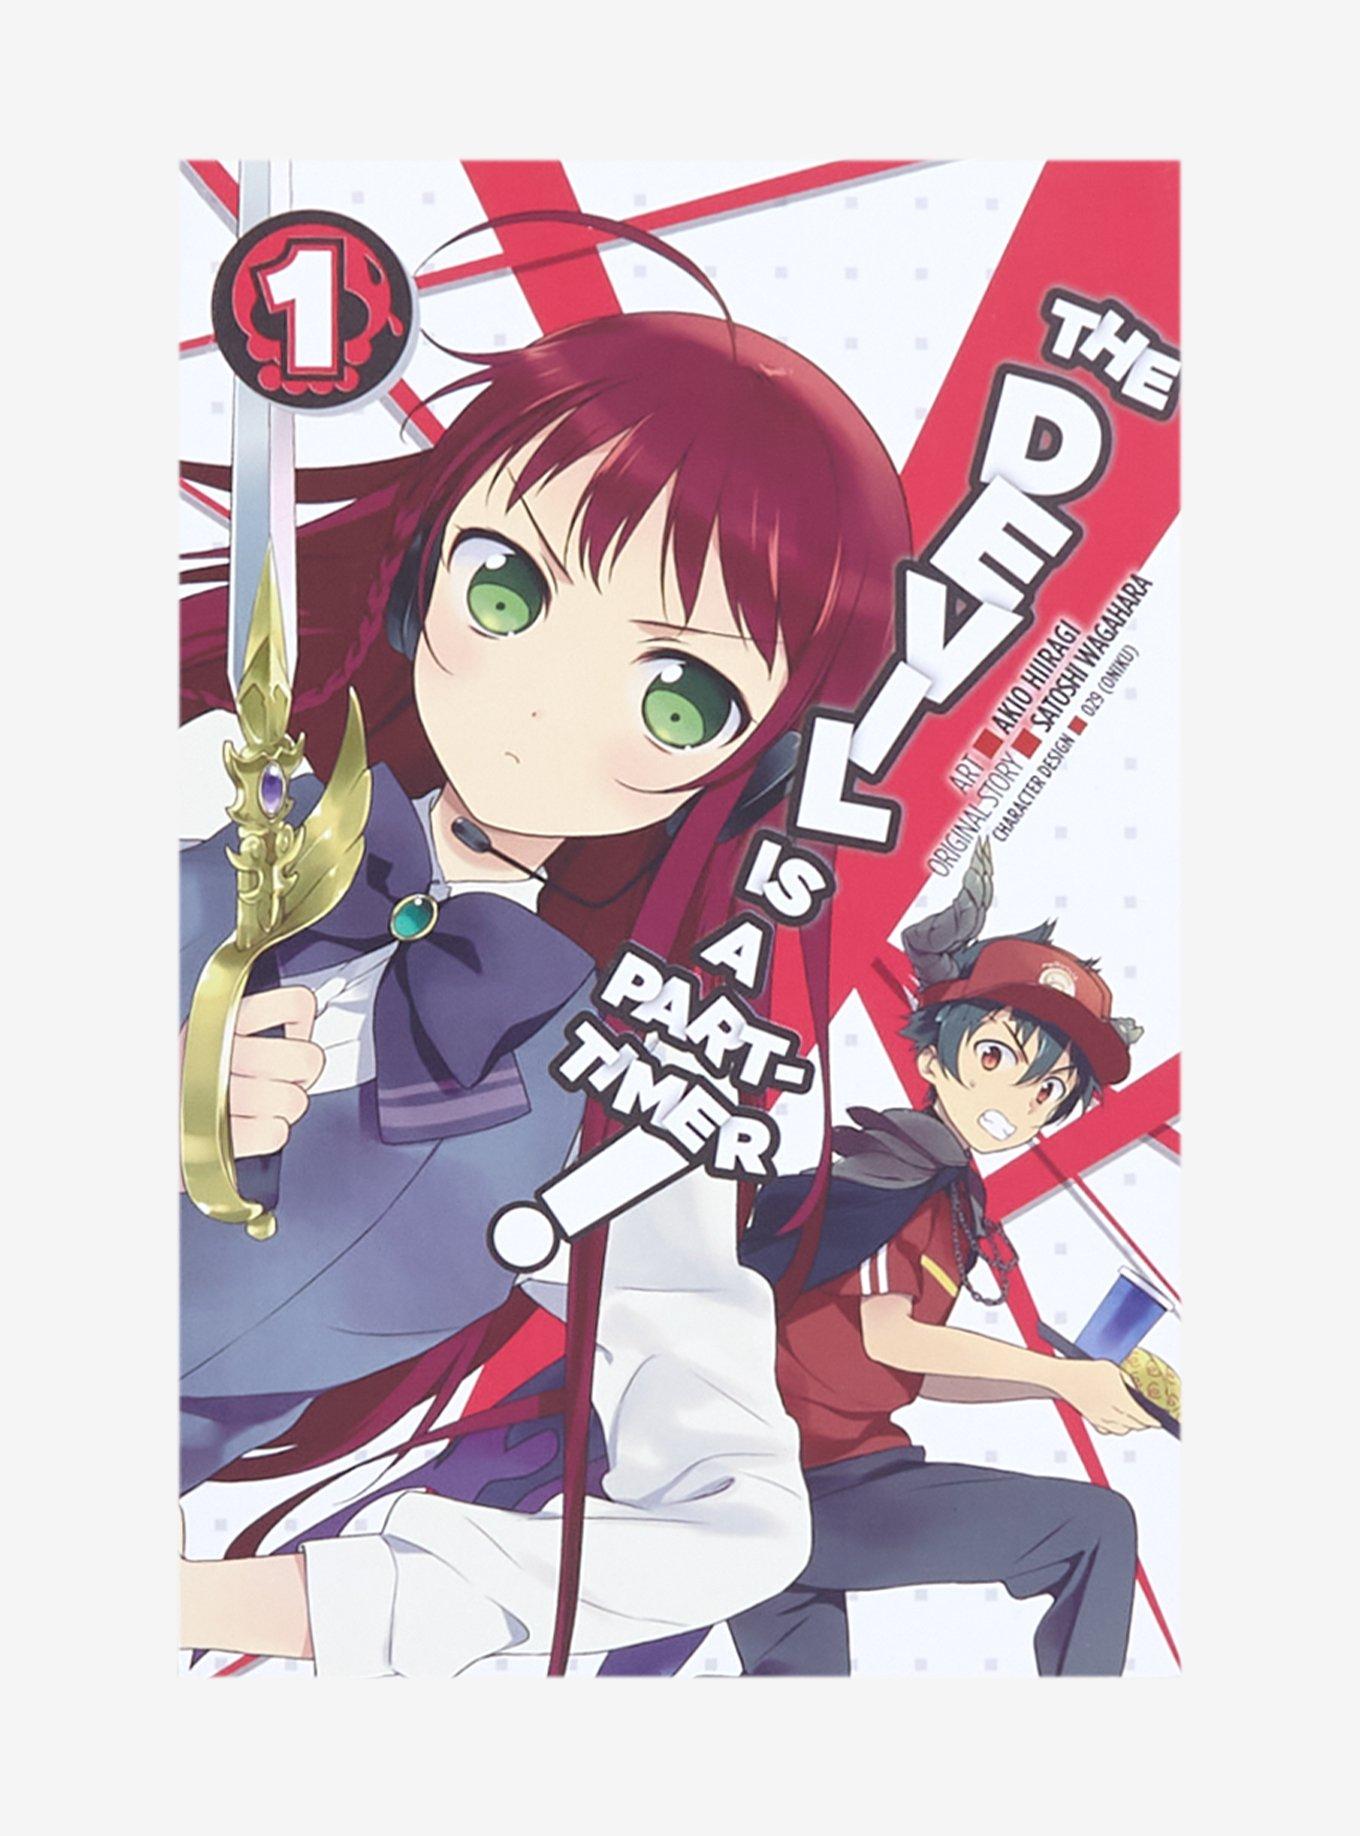 The Devil Is A Part-Timer! Volume 1 Manga | Hot Topic